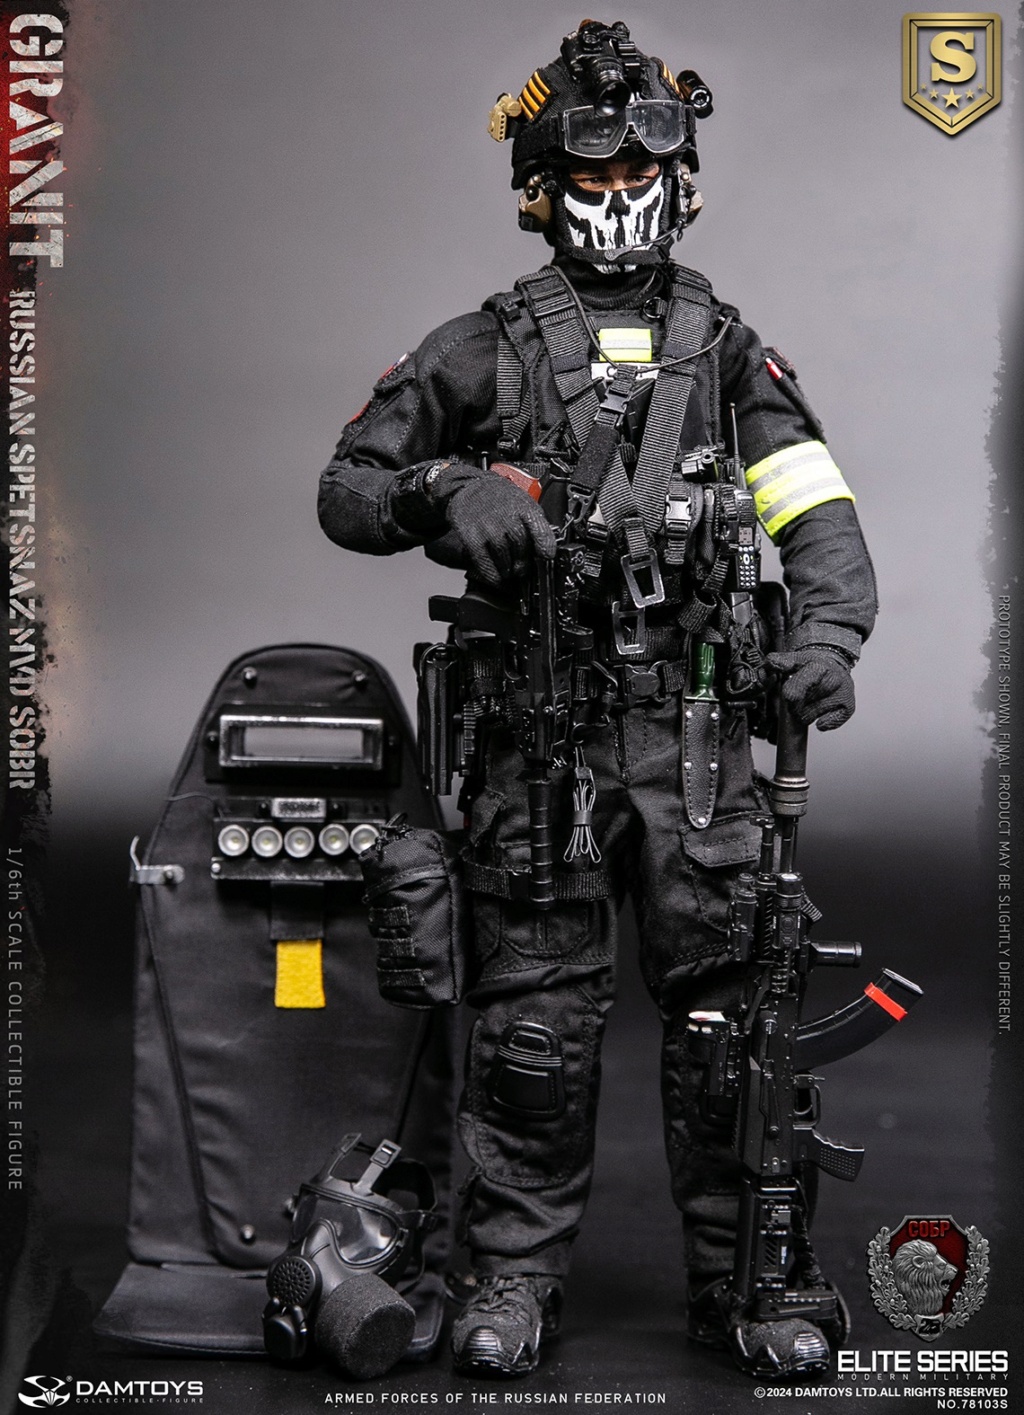 Newproduct - NEW PRODUCT: DAMTOYS: 1/6 Russian Federation Ministry of Internal Affairs MVD-Granite Special Response Team 78103S Special Edition/Elite Edition 11393010